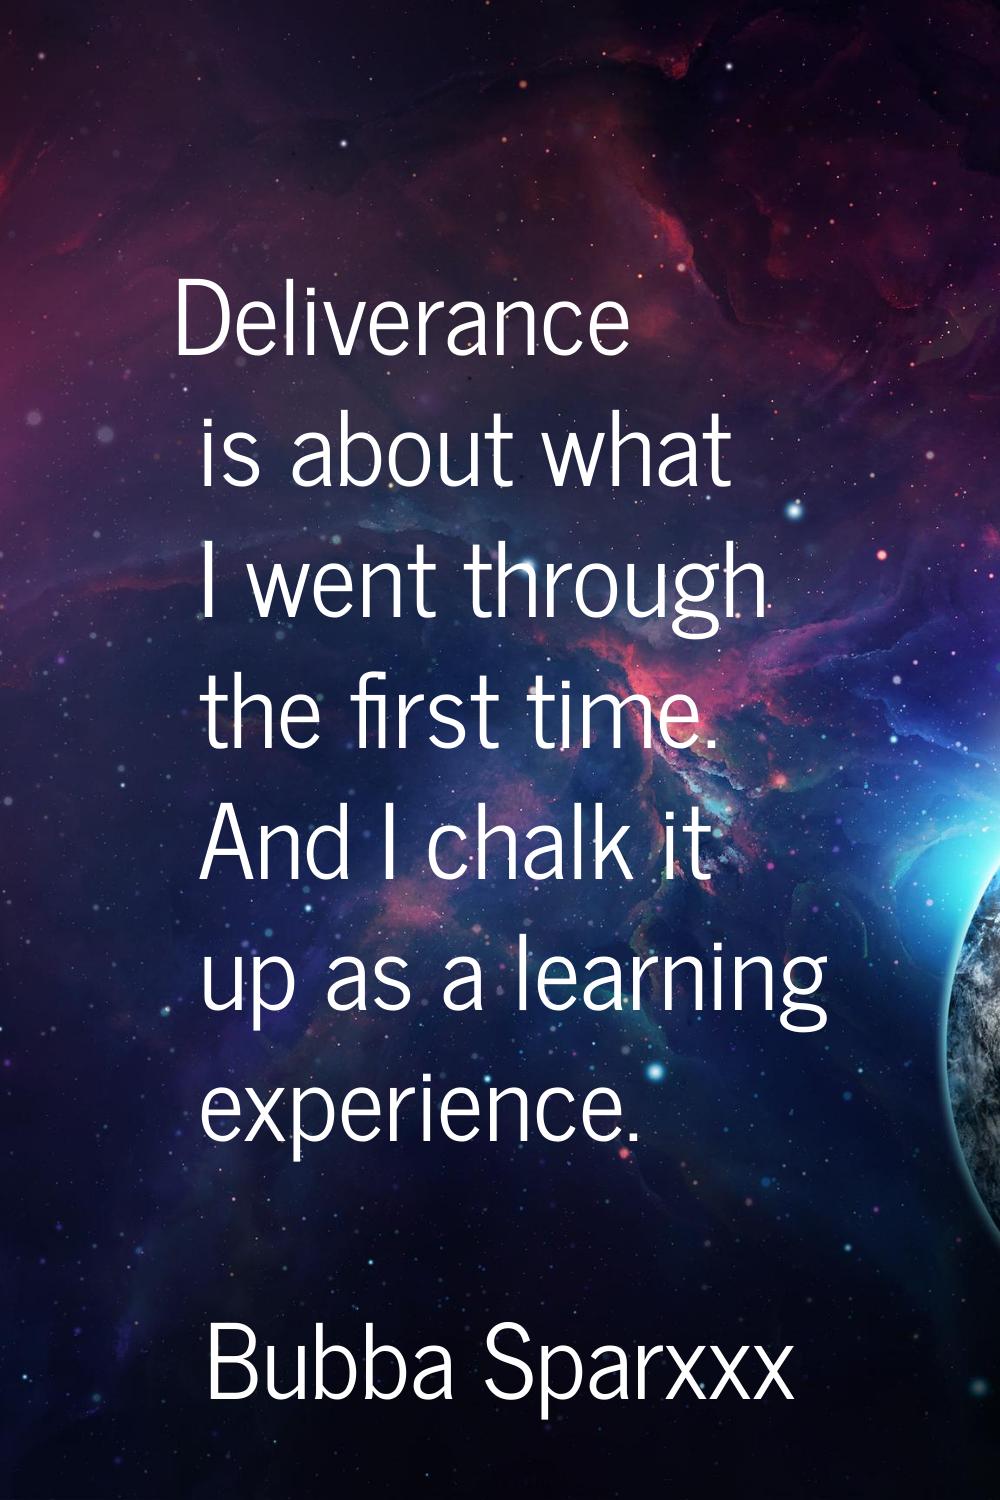 Deliverance is about what I went through the first time. And I chalk it up as a learning experience